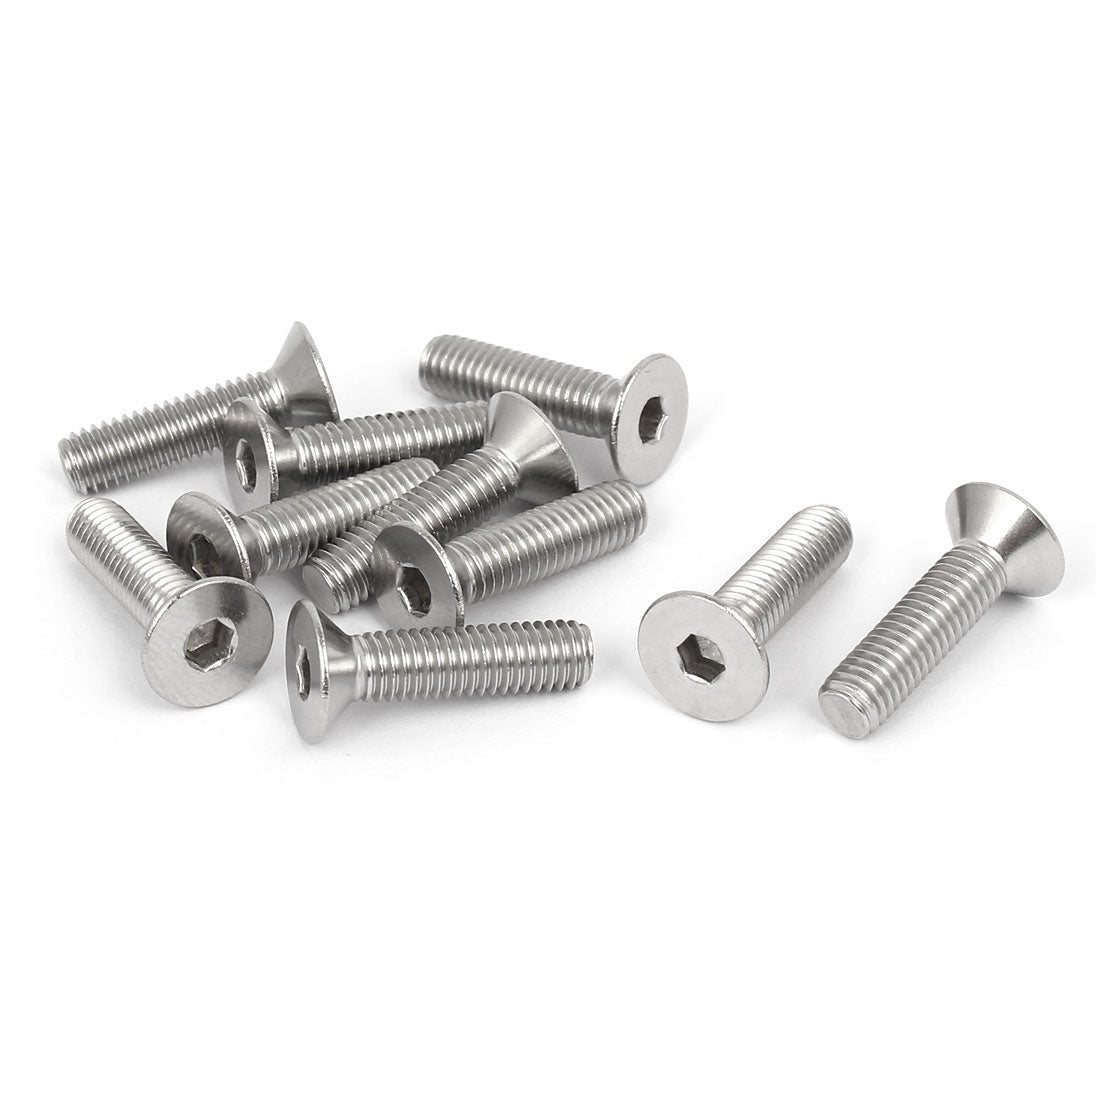 Uxcell Uxcell M5x20mm 316 Stainless Steel Countersunk Flat Head Hex Socket Cap Screw 10pcs